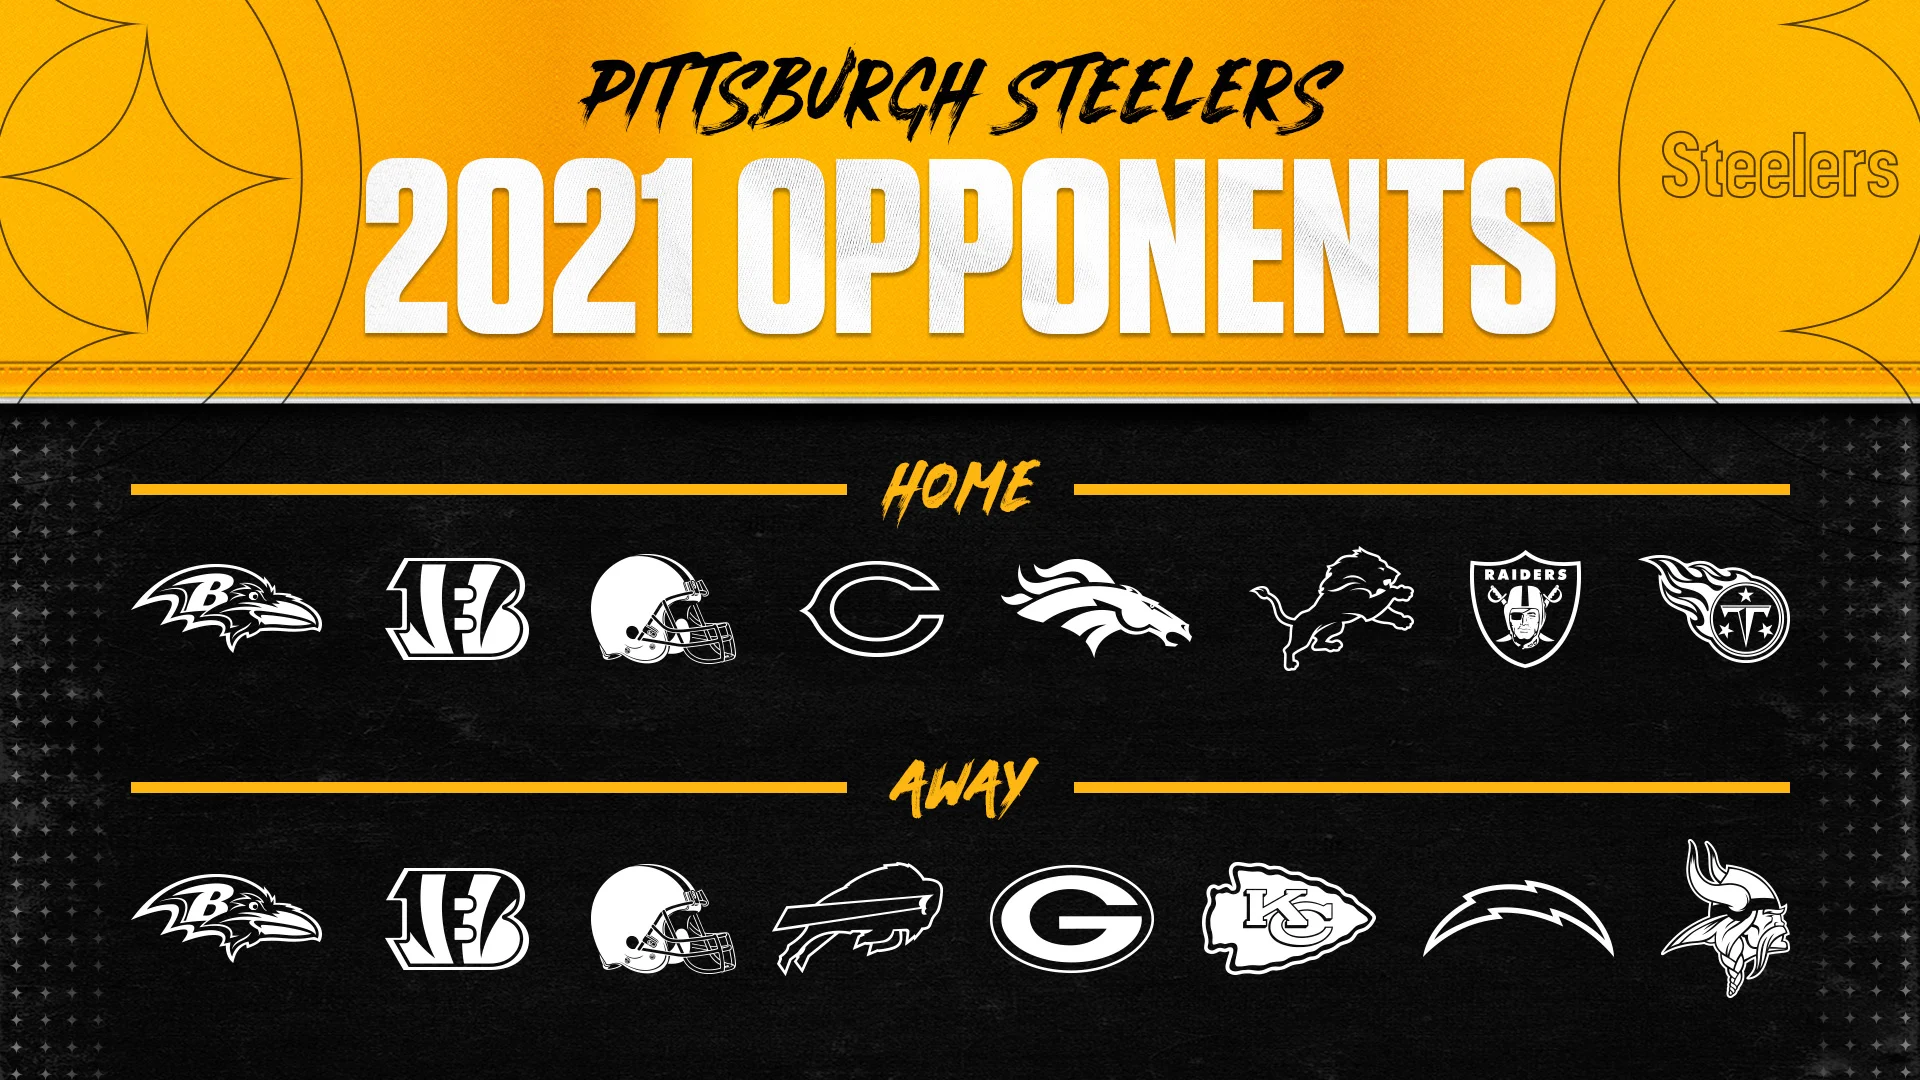 2021 Pittsburgh Steelers: Full Schedule, Future Opponents